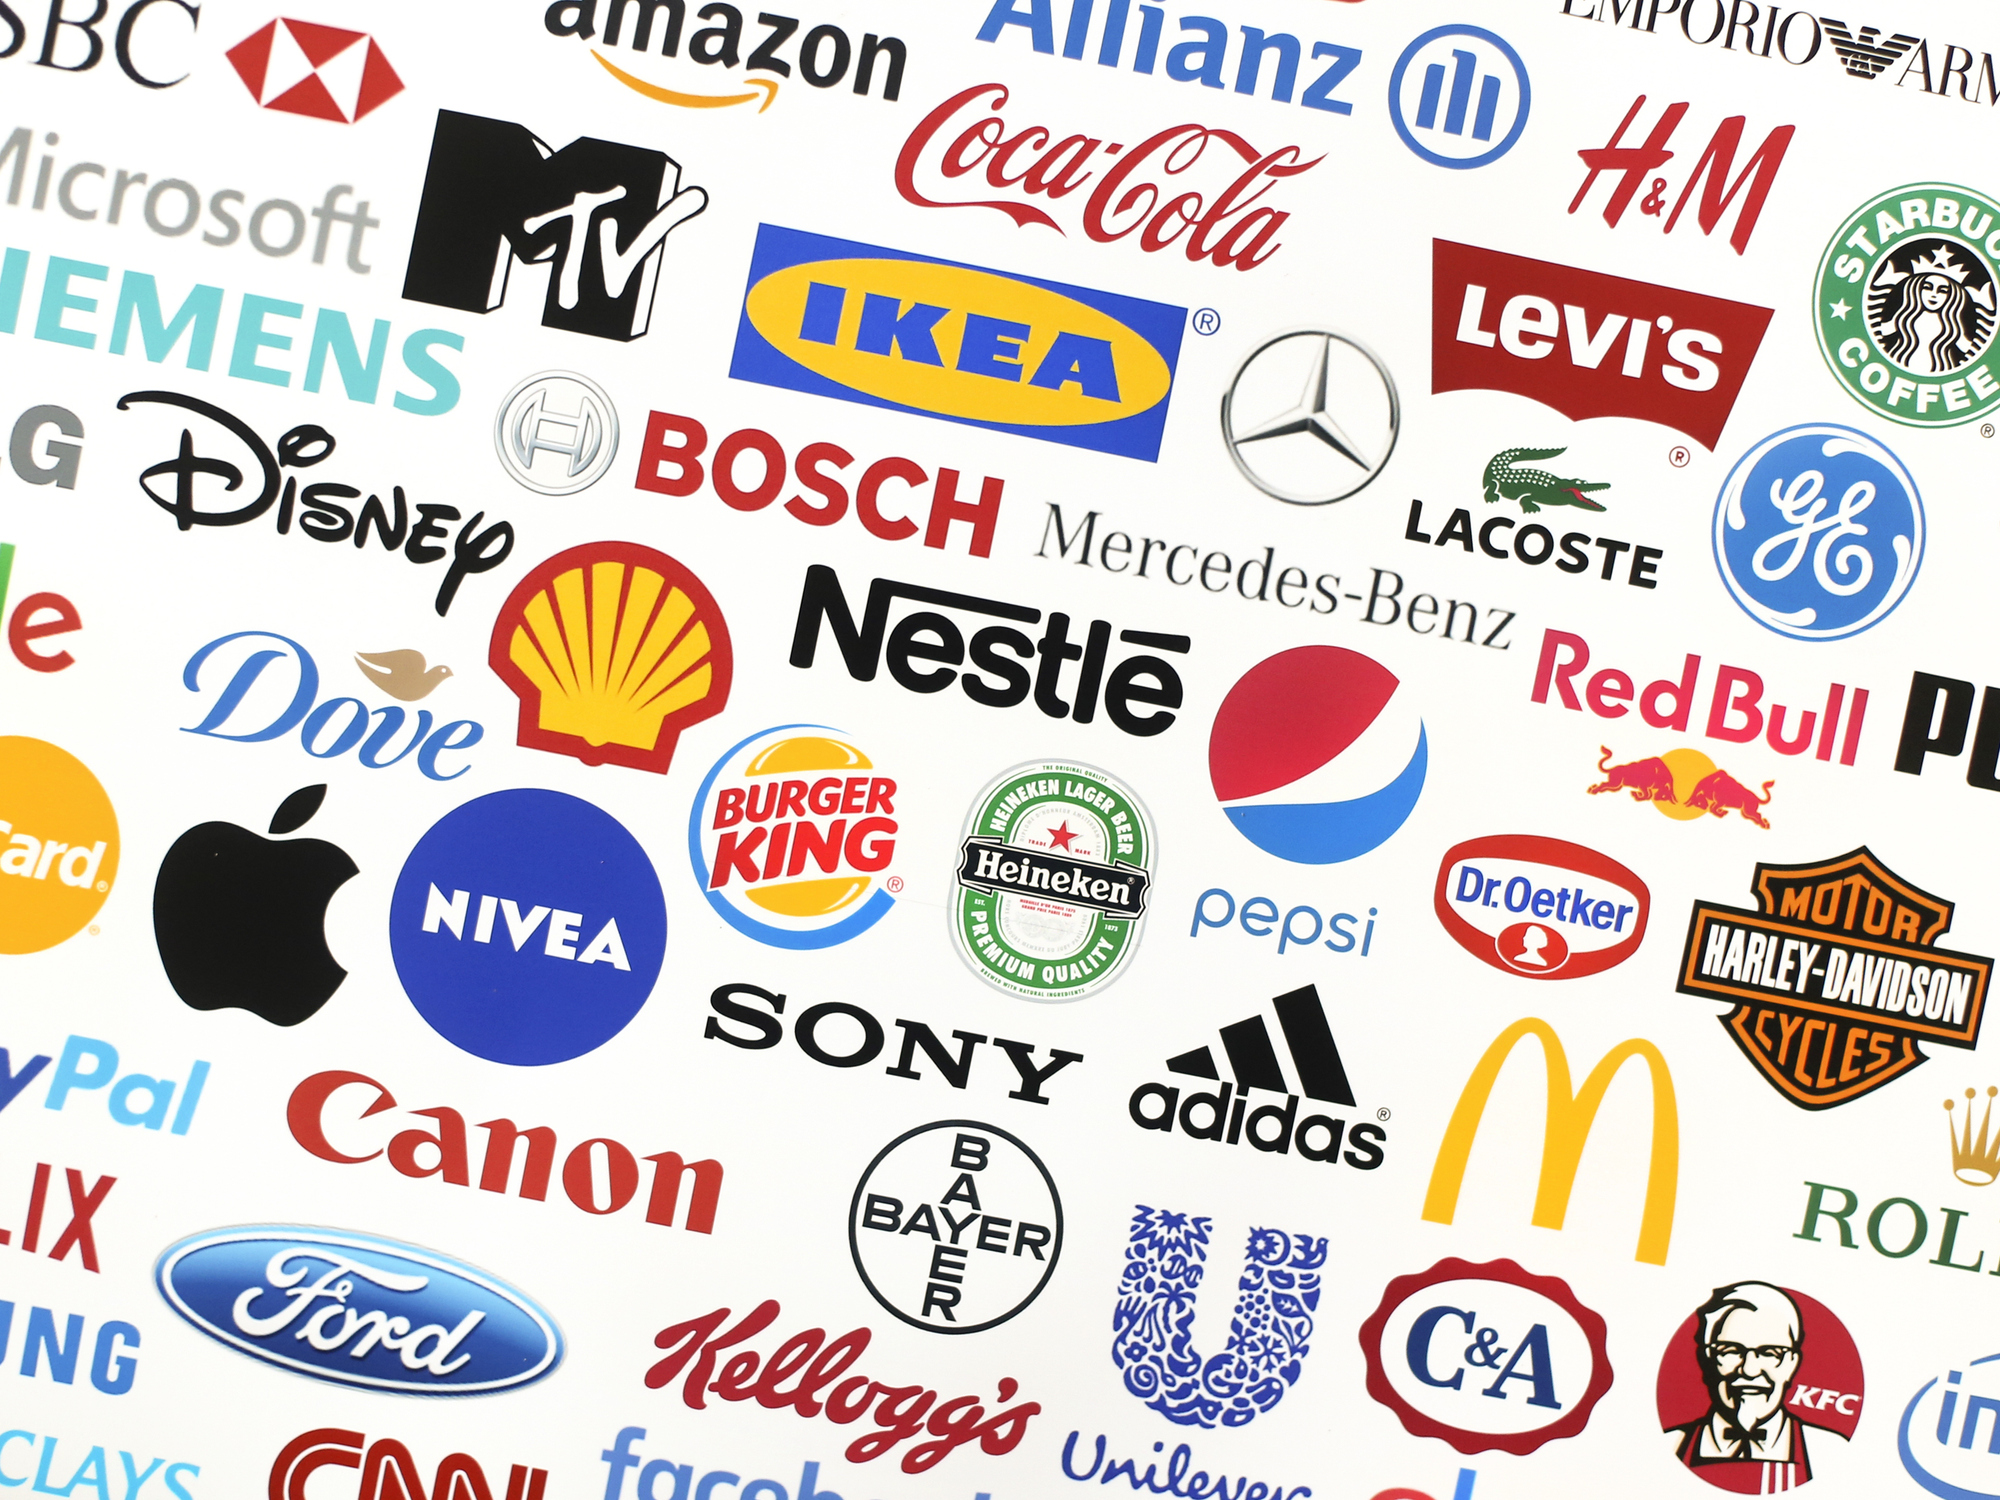 Logotype collection of some of most famous brands in the world on a screen - including Adidas, Nestle, Nike, McDonald's, Sony, Facebook, Ikea, Pepsi and much more printed on quality paper and shot with a high resolution camera.